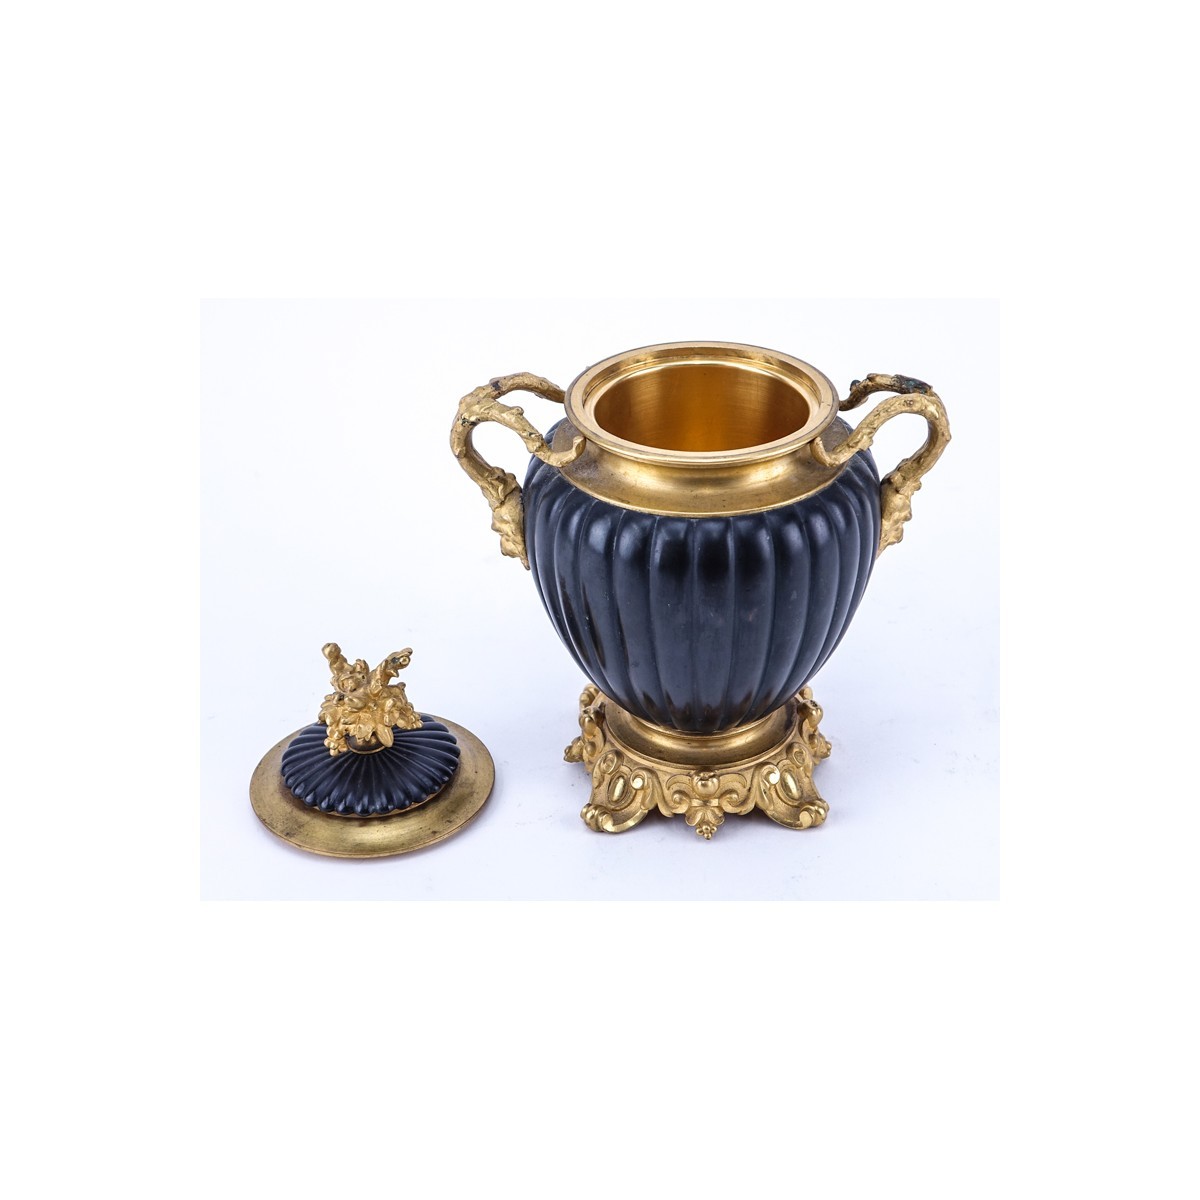 Neoclassical Style Gilt Brass and Painted Covered Urn with Bacchus Motif. Light rubbing to gilt overall good condition.